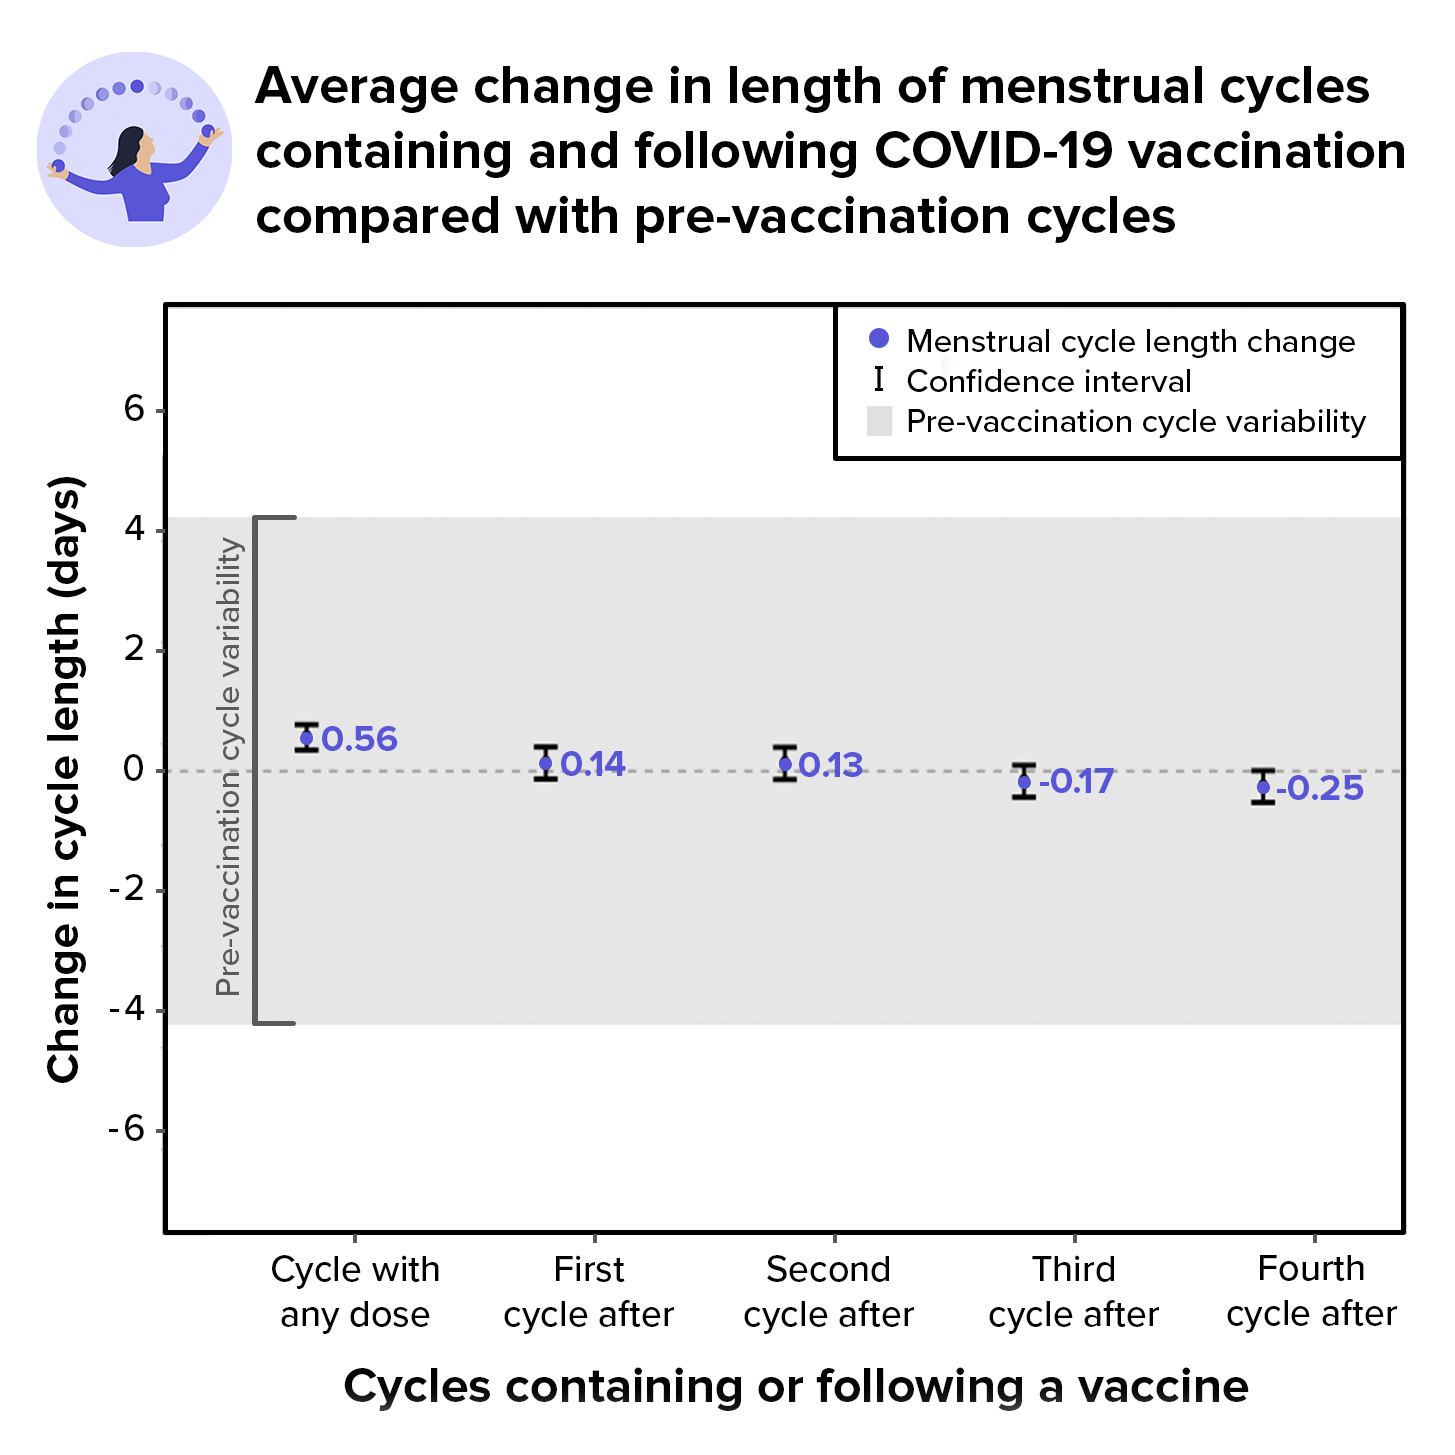 Chart shows that small changes in menstrual cycle length observed in cycles containing a COVID-19 vaccine dose did not persist for the four cycles following a vaccine dose.